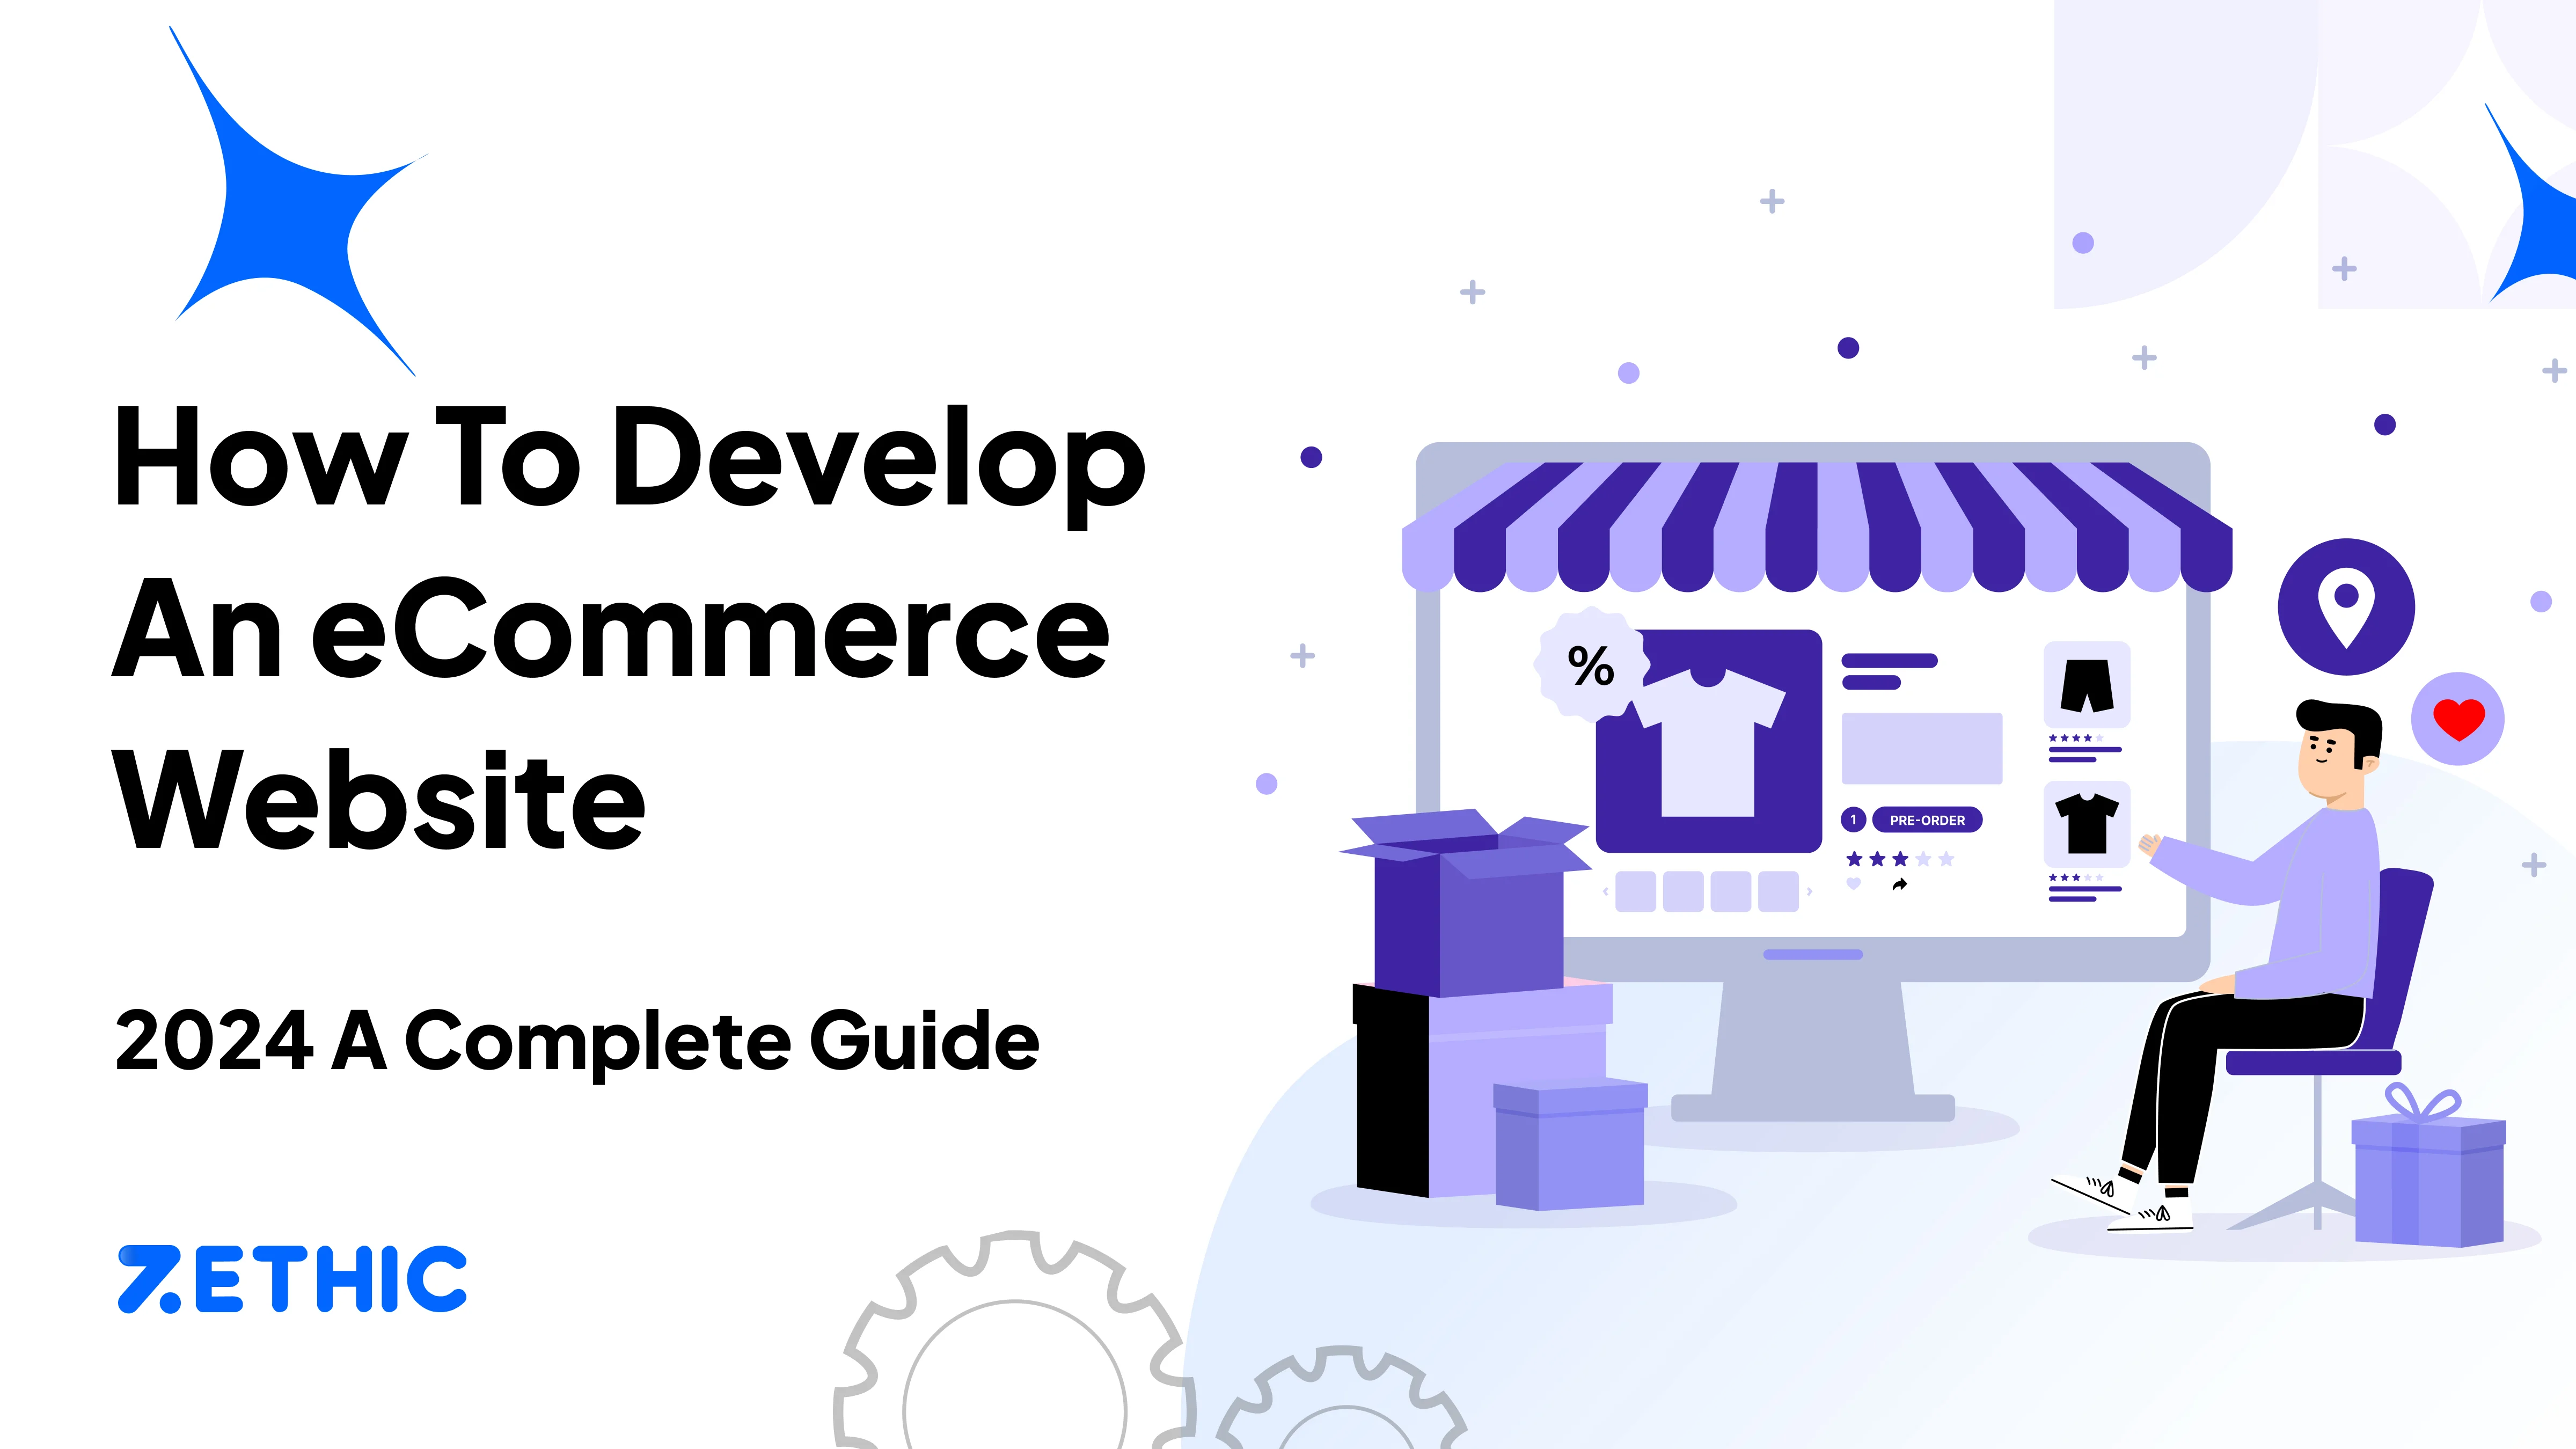 How to Develop an eCommerce Website from Scratch in 2024